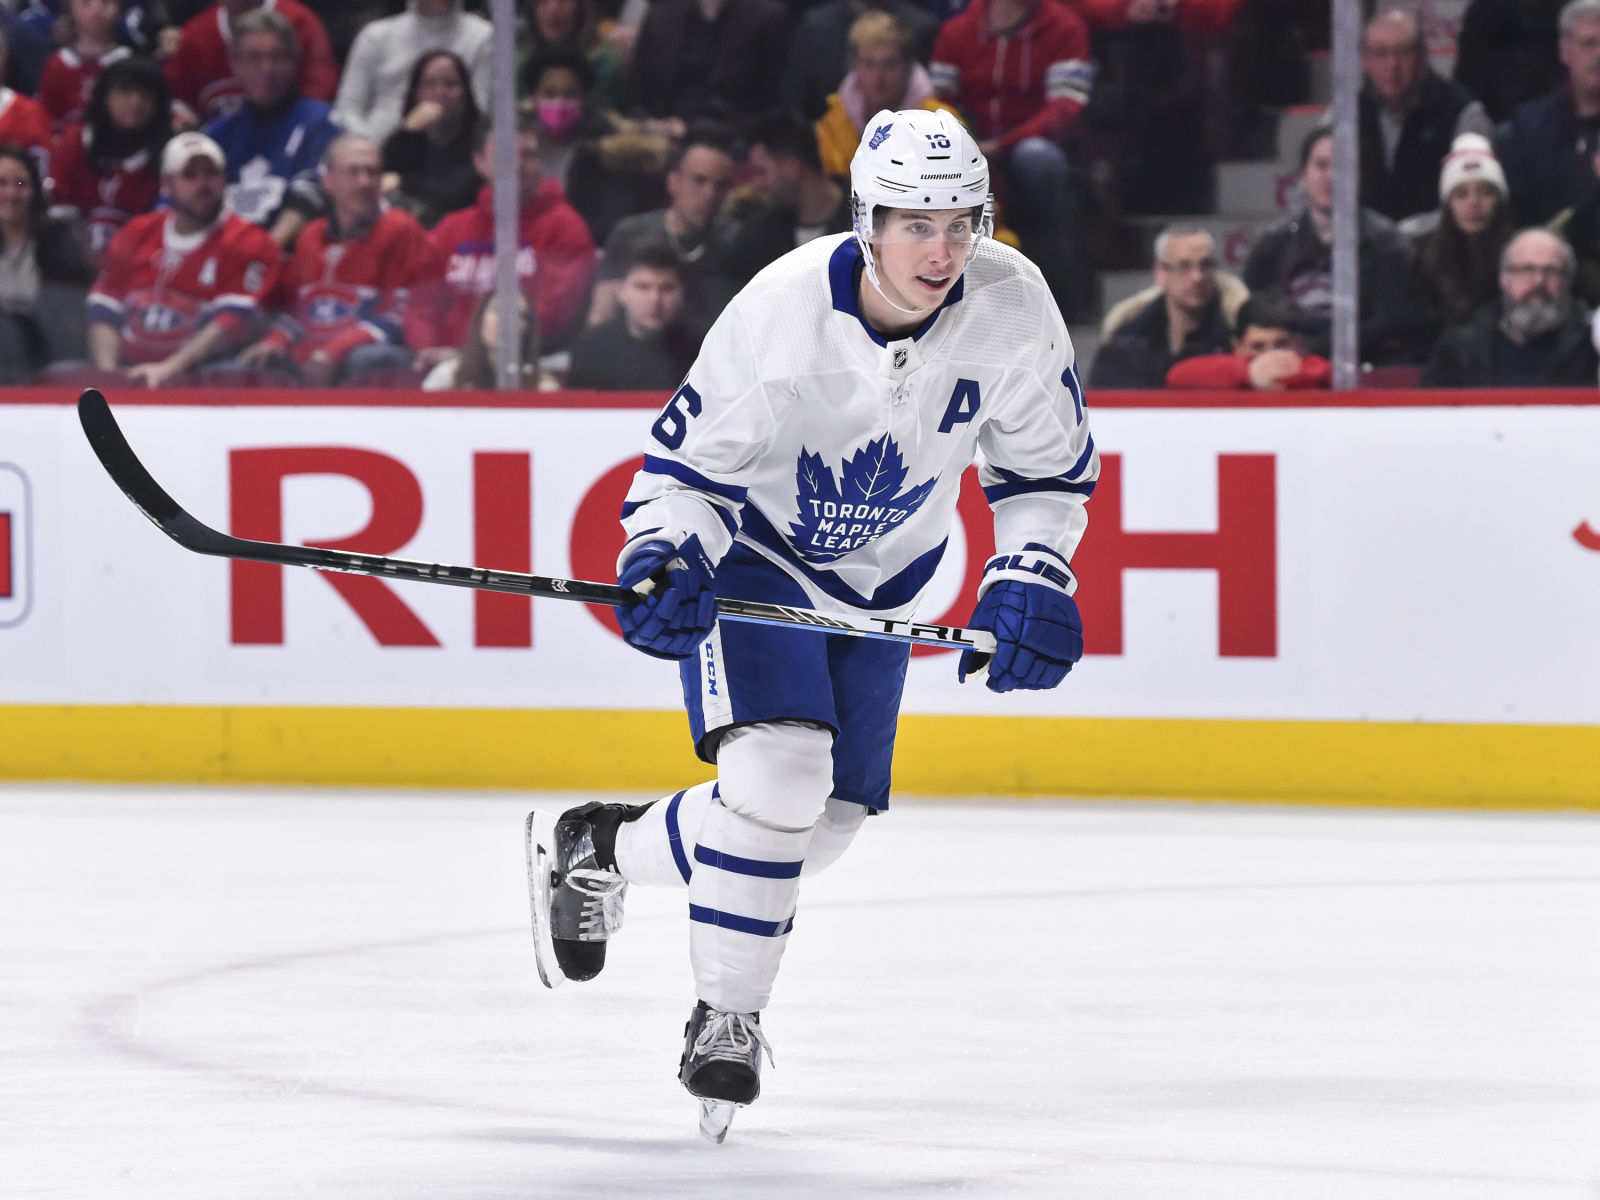 Top 5 Most Valuable Players on the Toronto Maple Leafs This Season